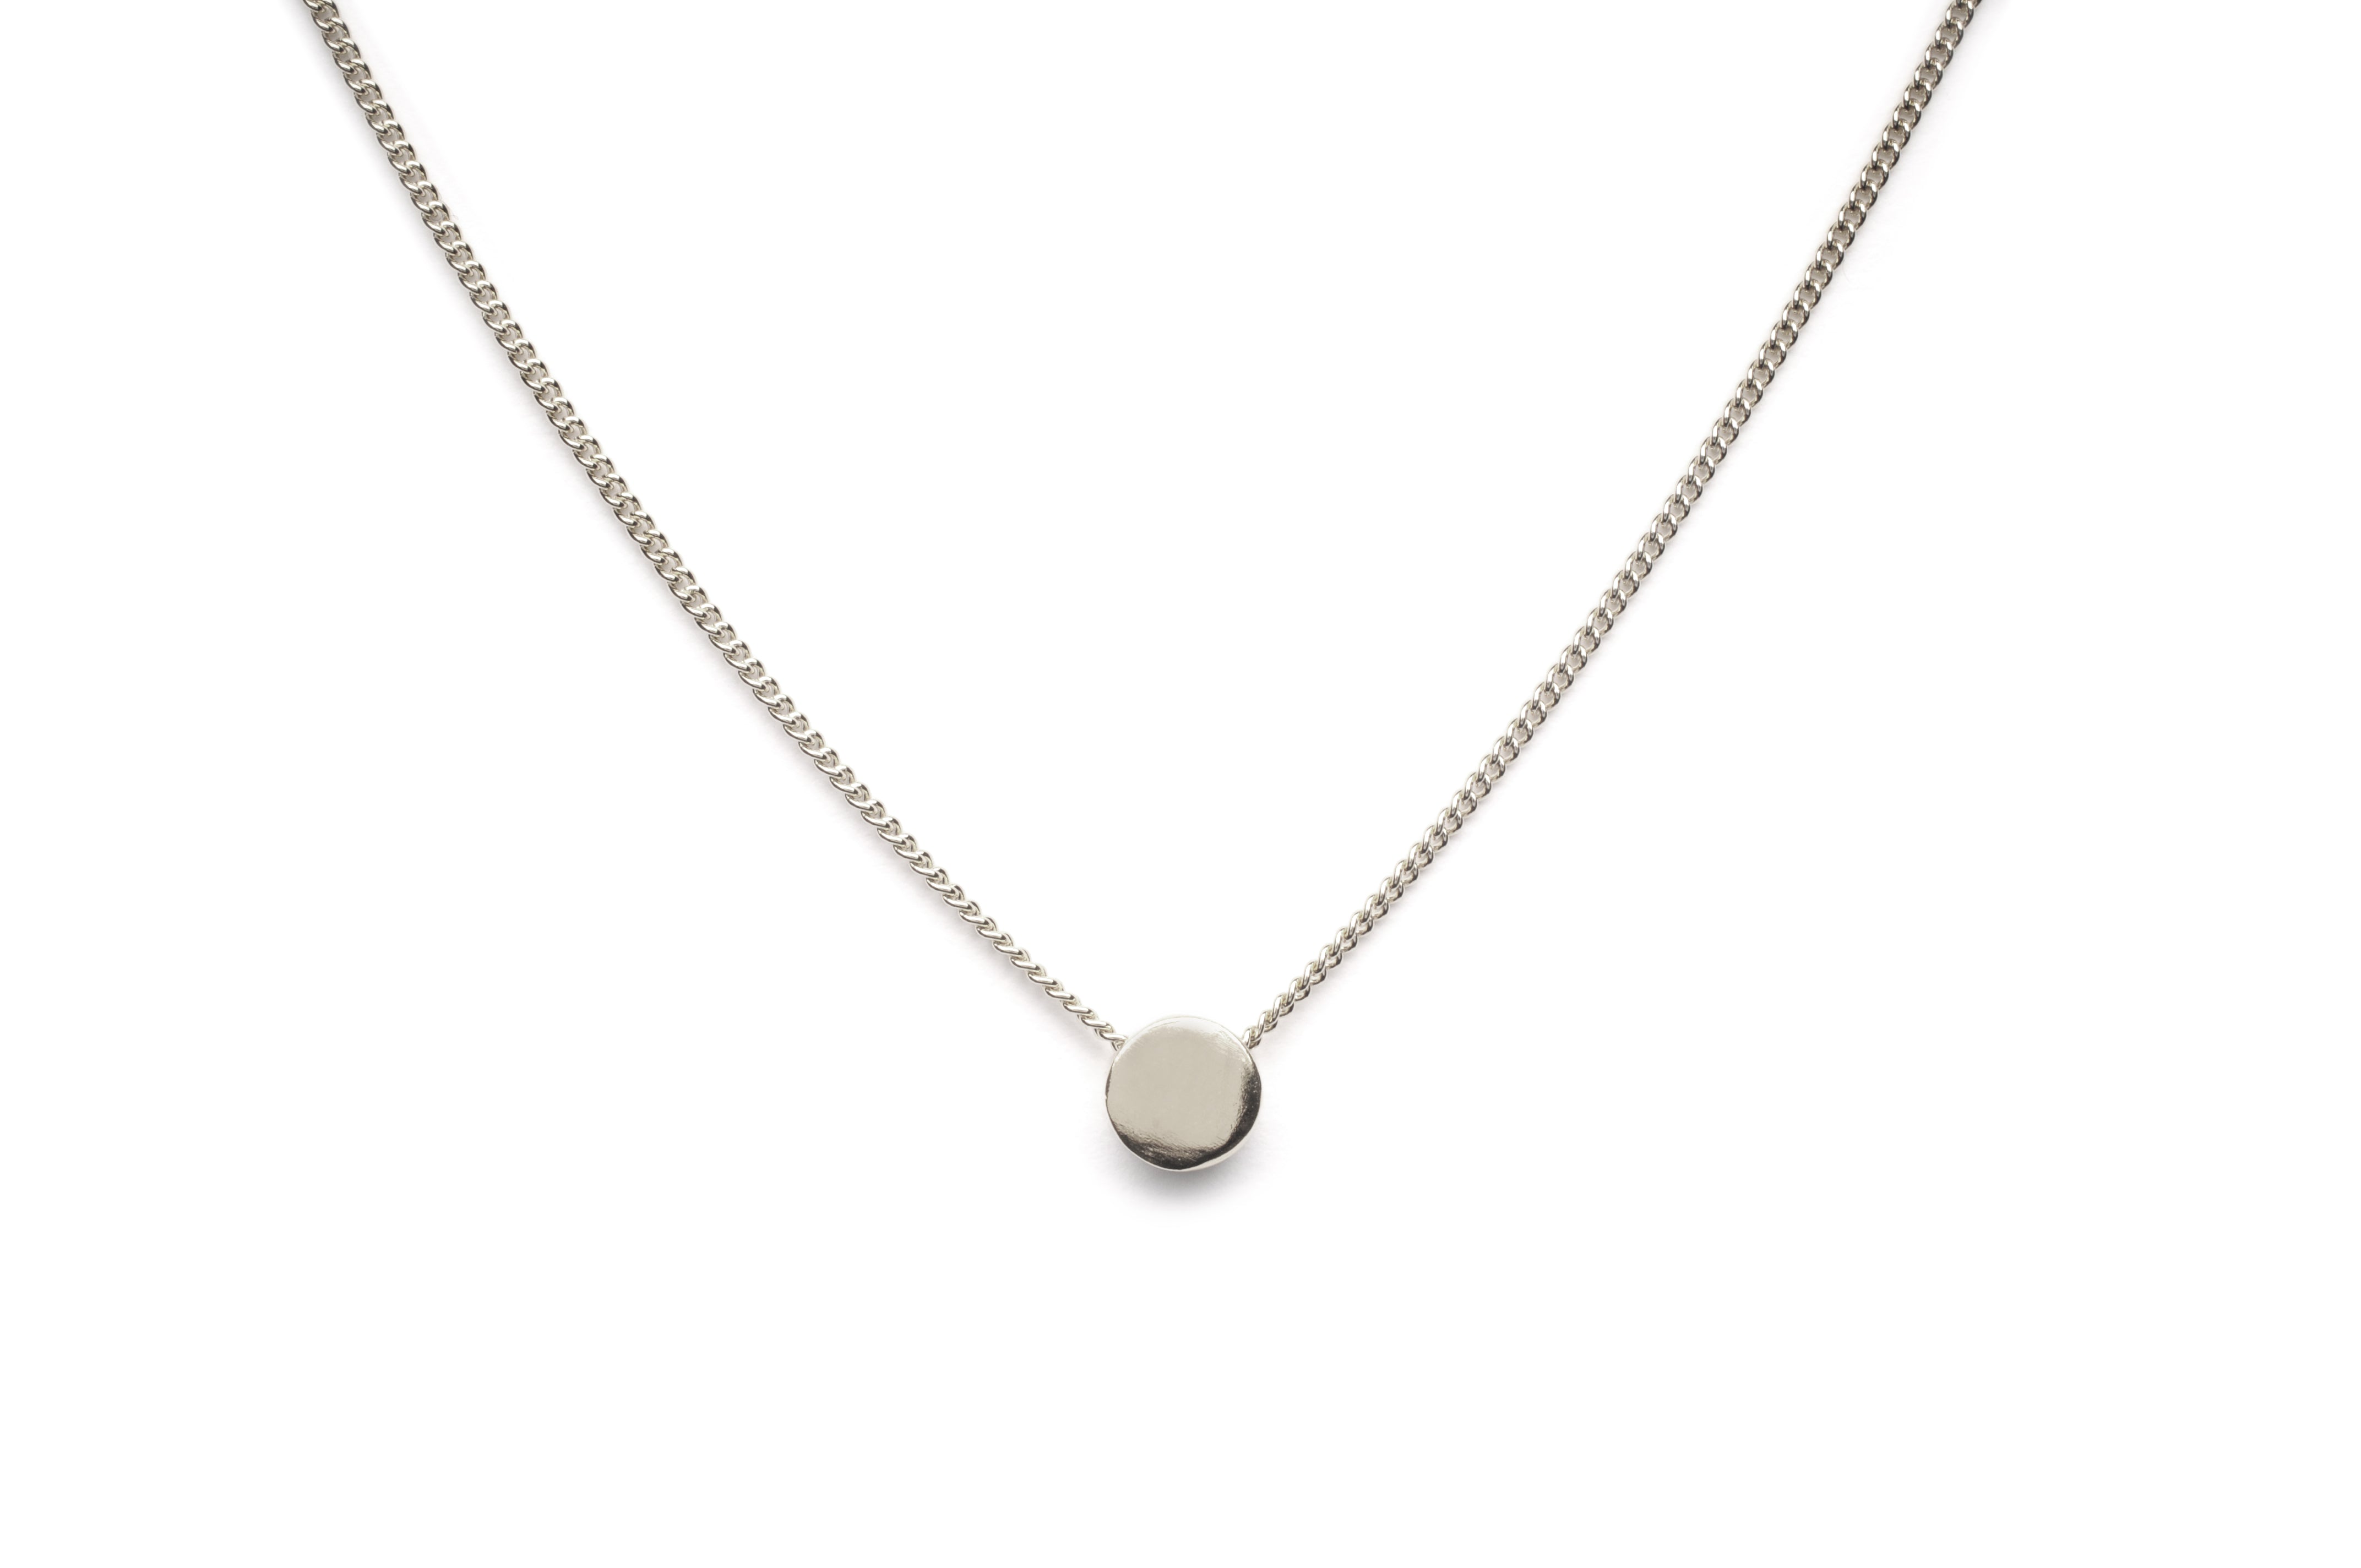 Wouters & Hendrix - silver pendant necklace